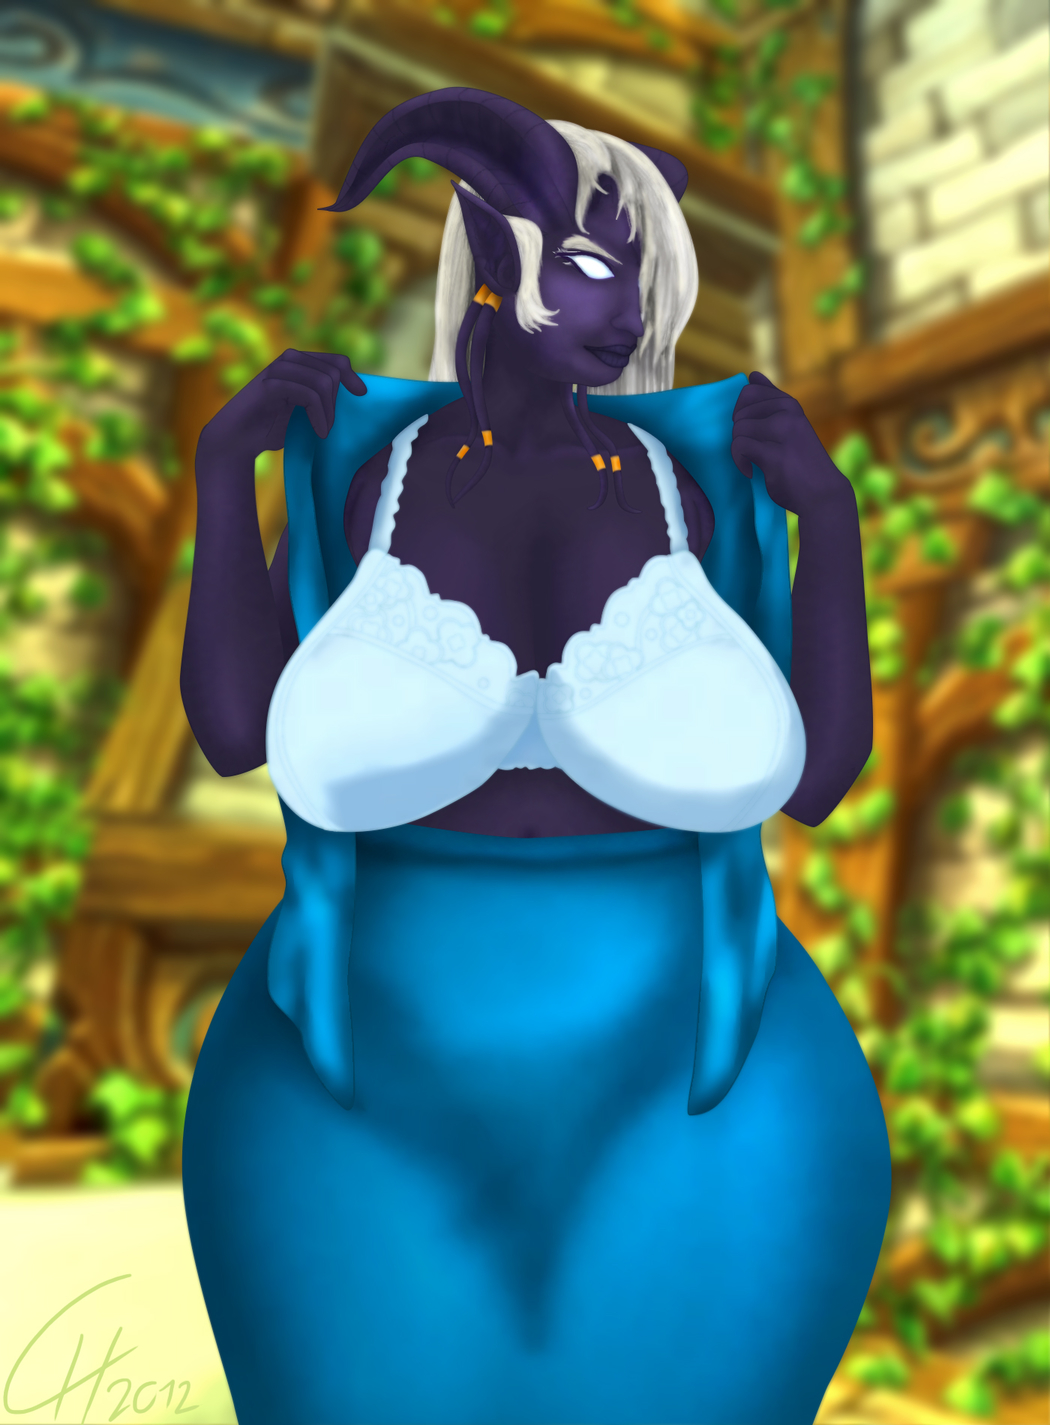 Teasing Mother [Draenei/BBW/Tease]
Little did he know, this ancient draenei mother
had some tendency to tease people.
Keywords: Draenei;OC;Tease;BBW